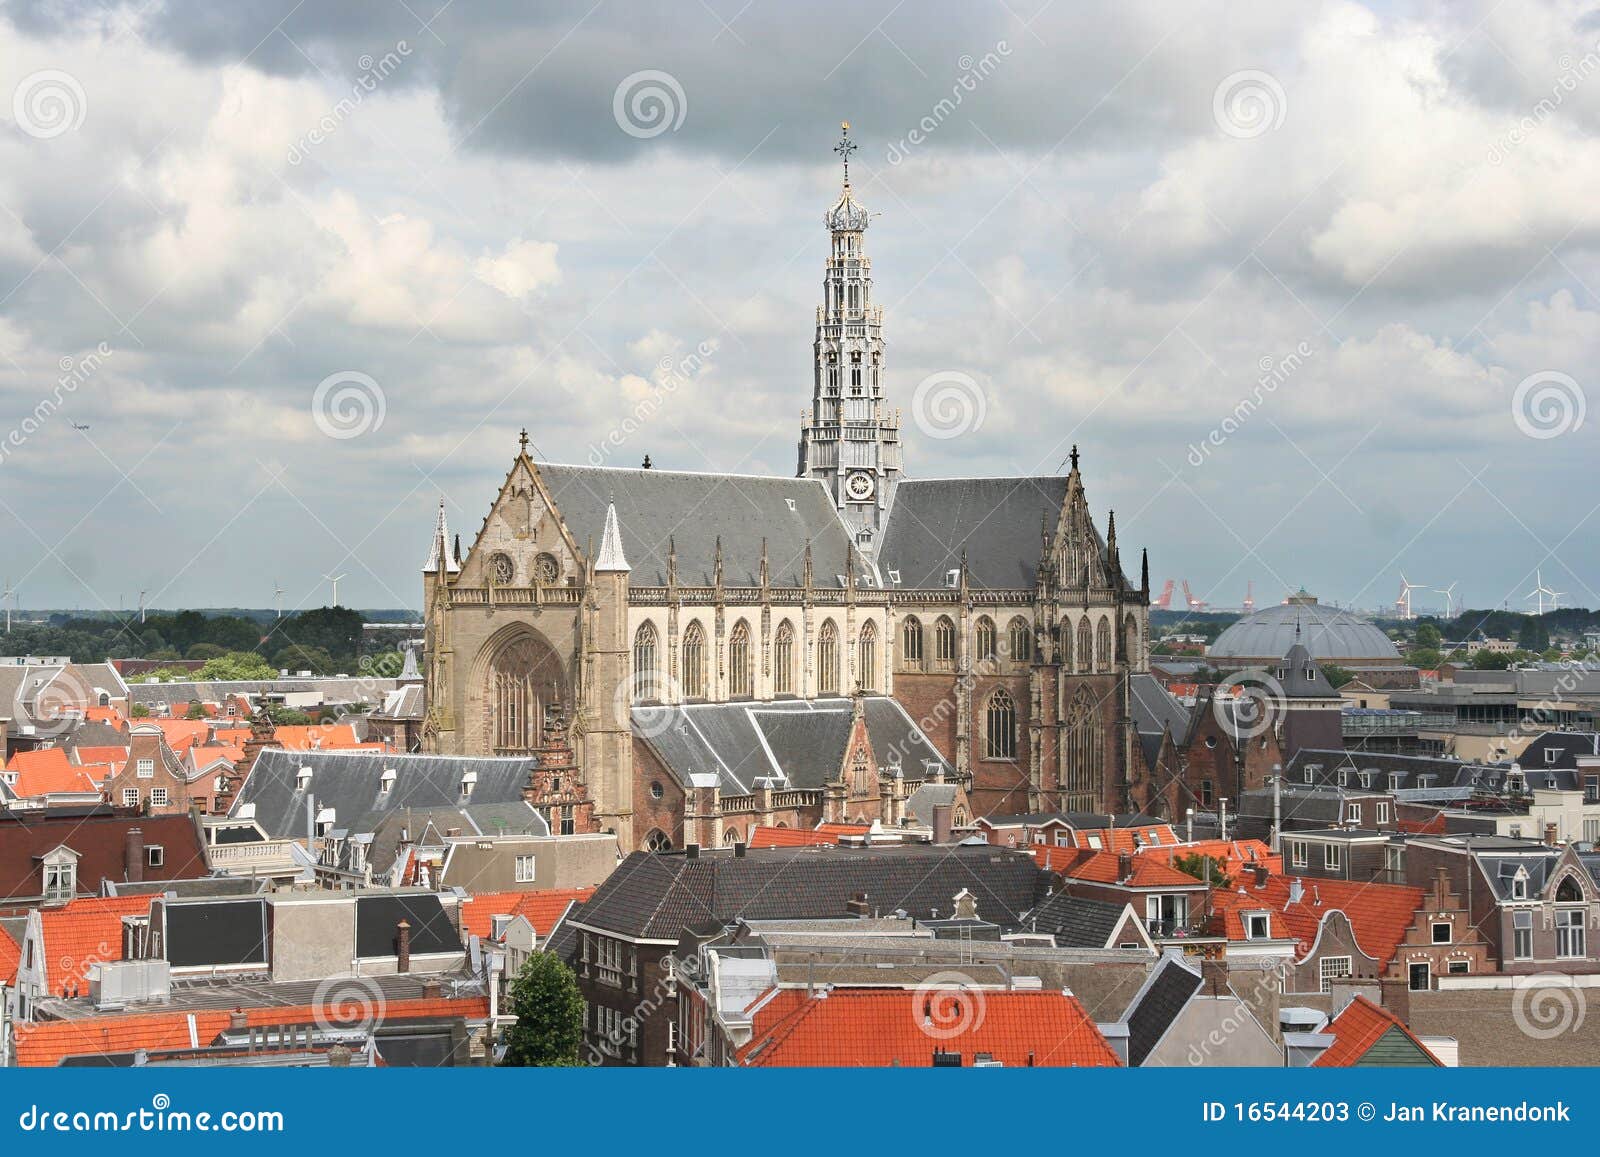 cathedral of haarlem